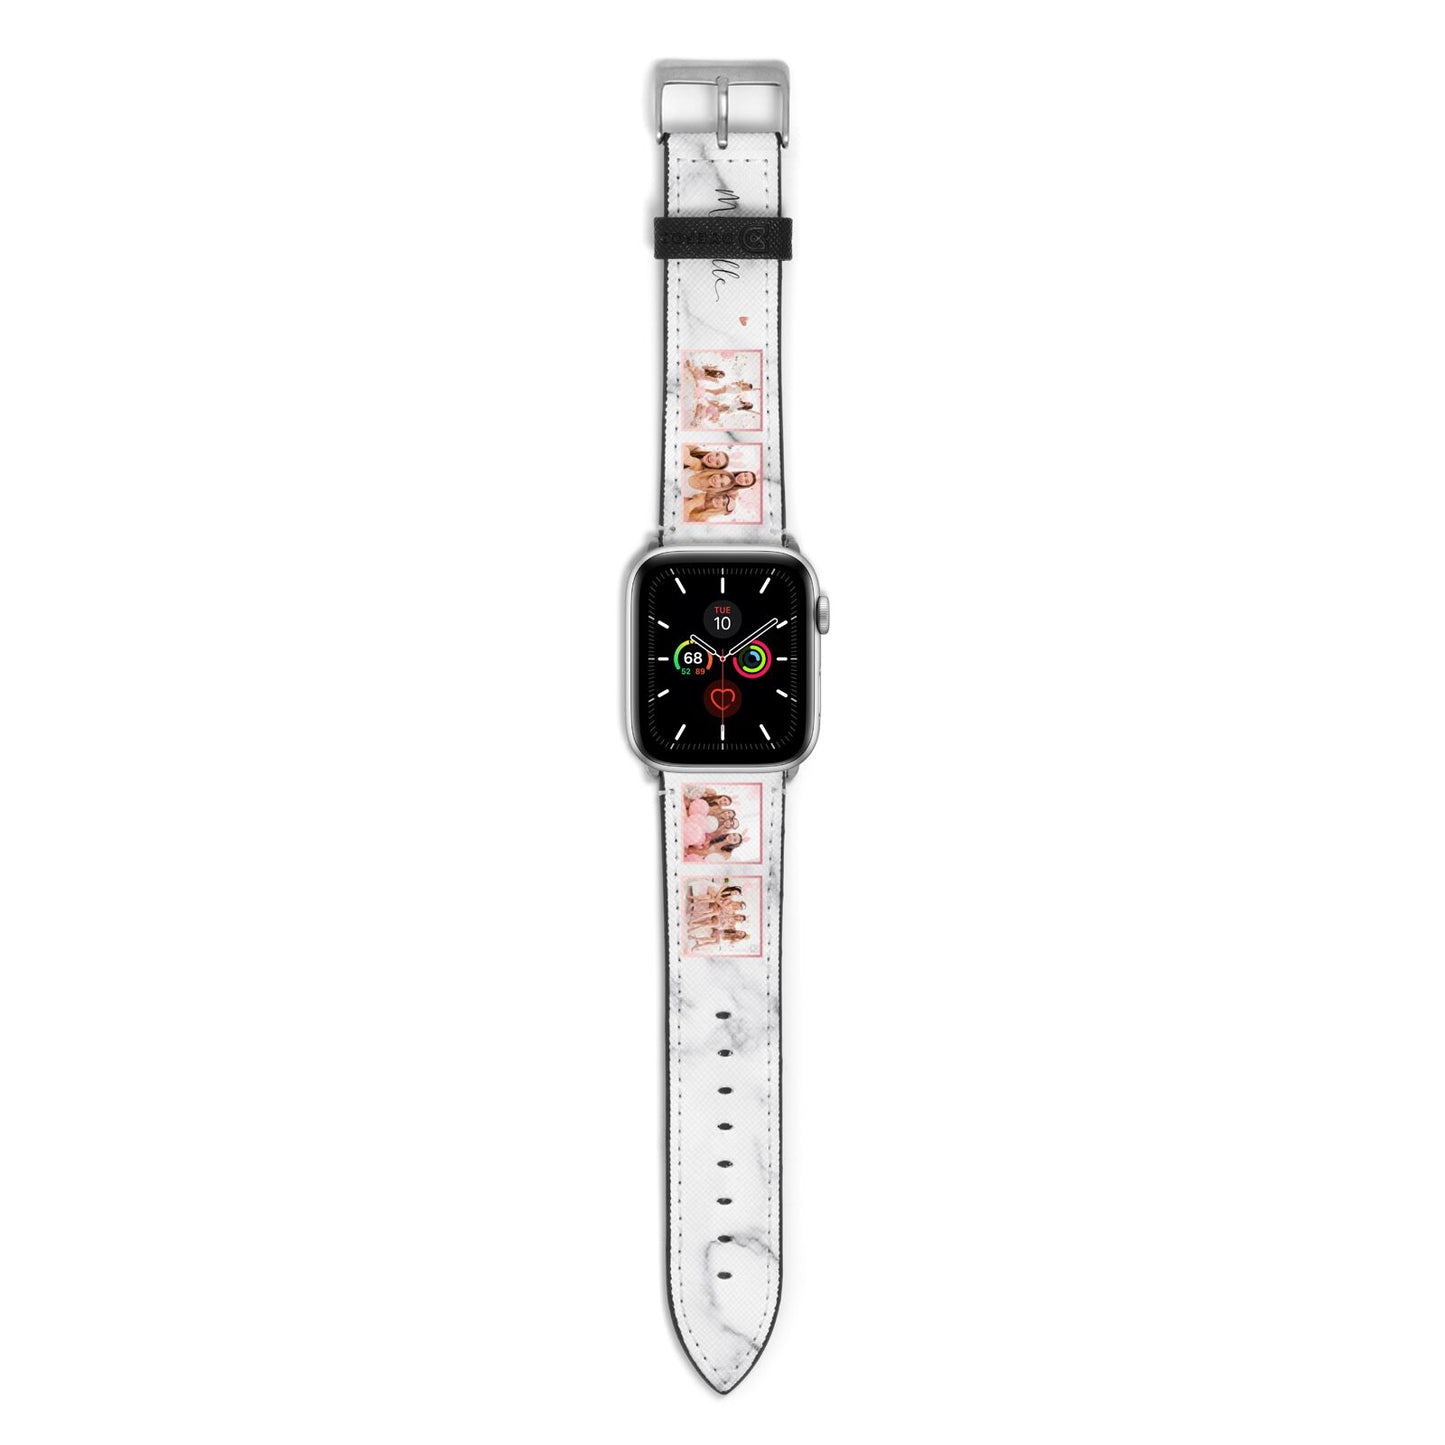 Marble Photo Strip Personalised Apple Watch Strap with Silver Hardware